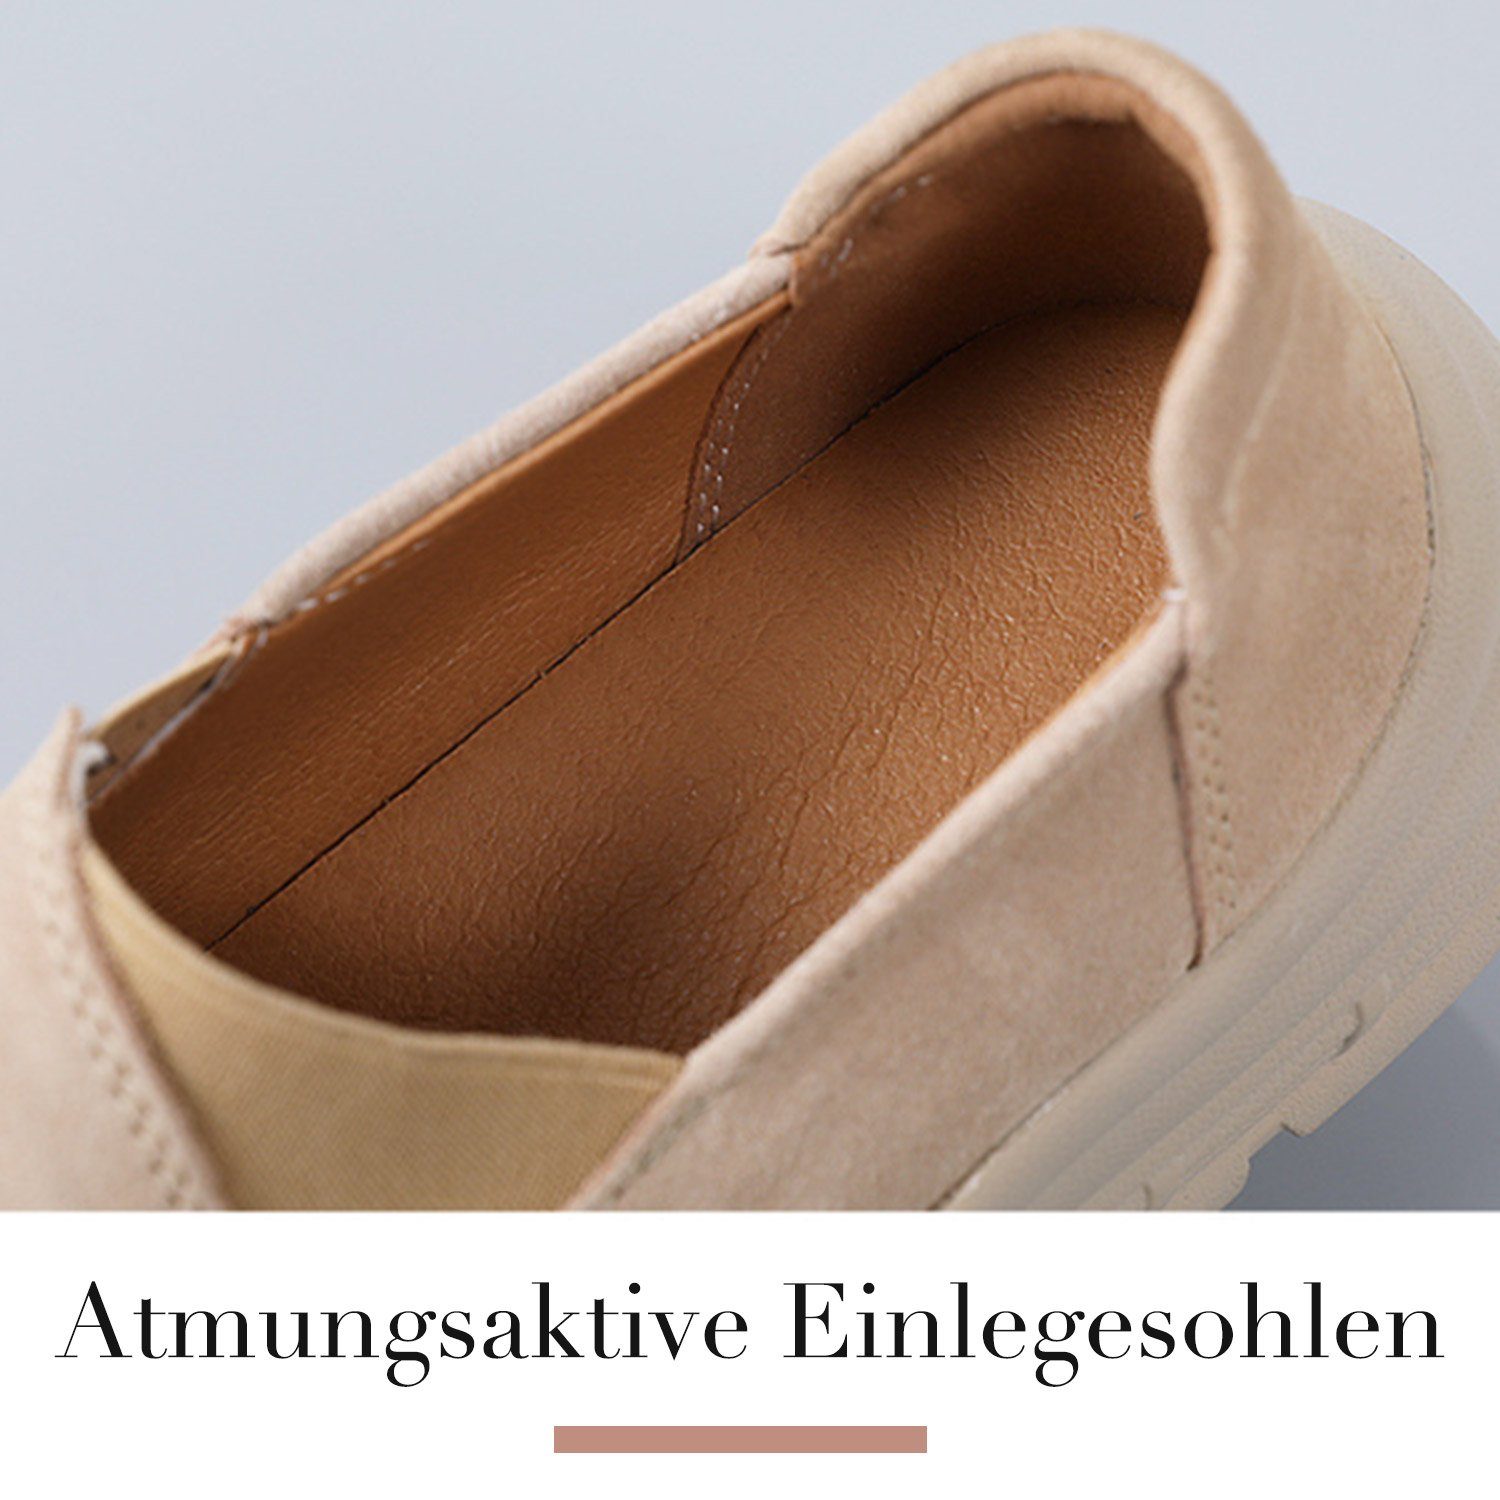 Daisred Turnschuhe mit Plateausohle Sneakers Bequeme Loafer Kaffee